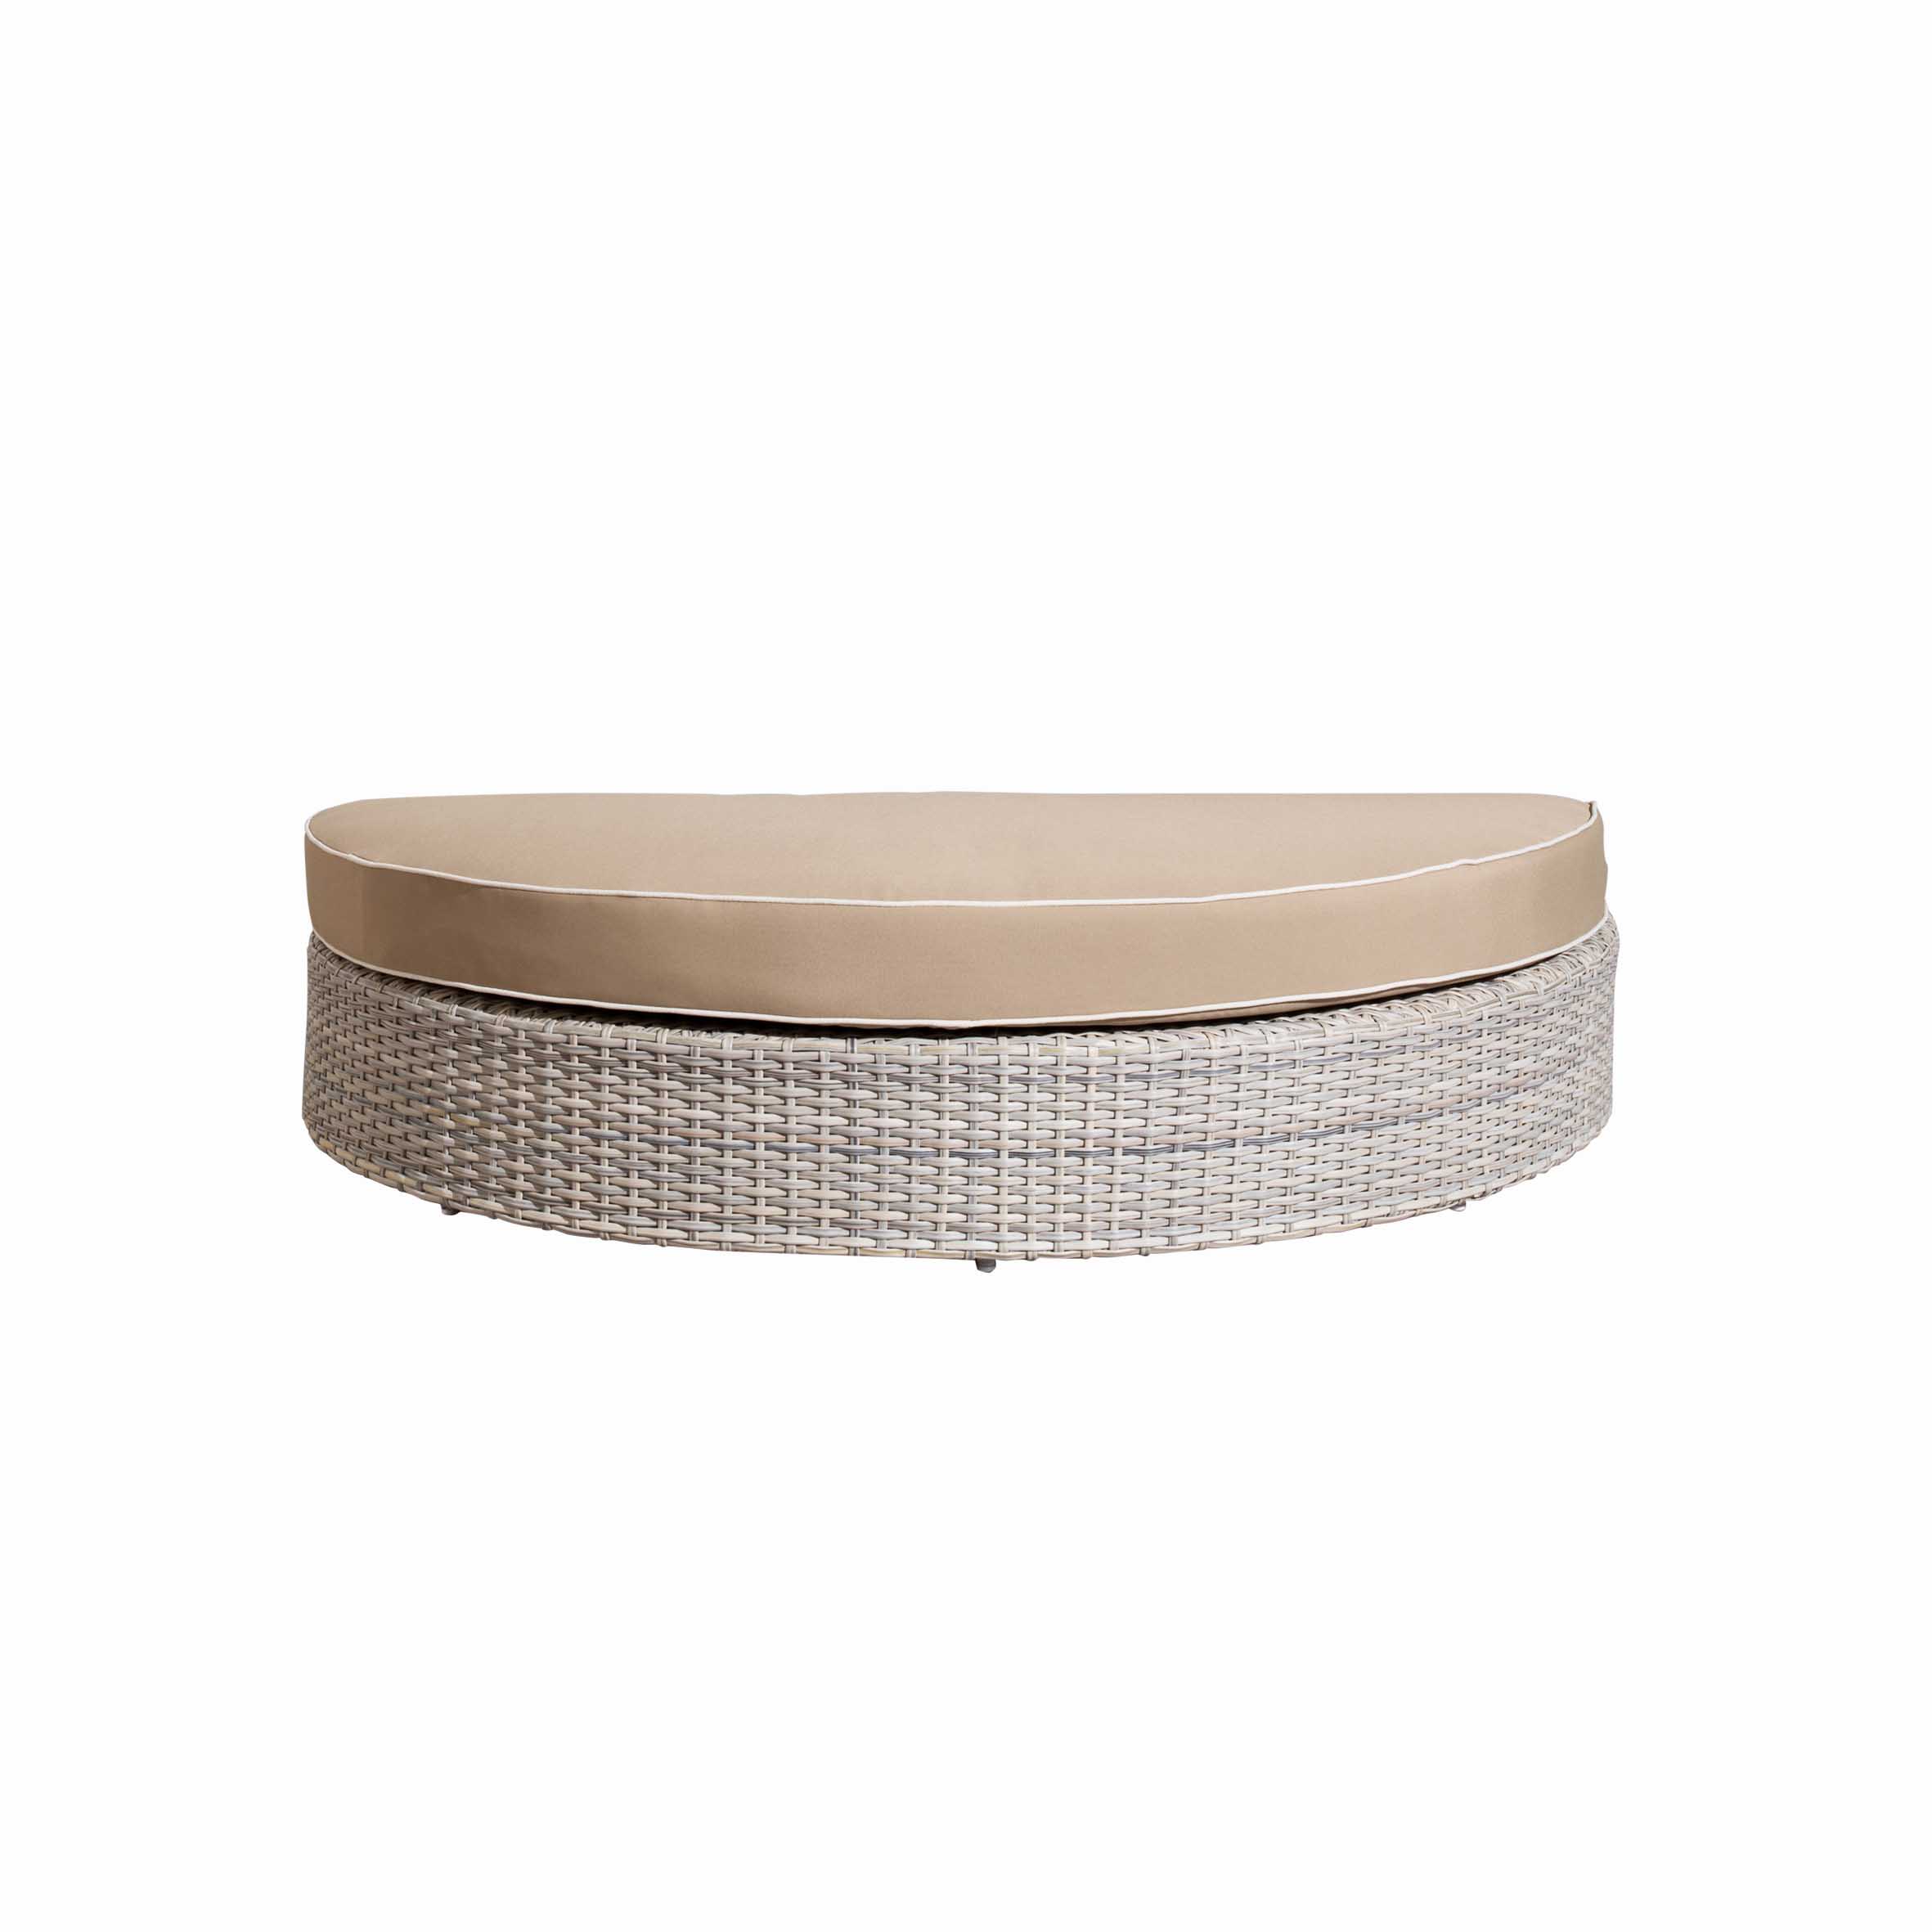 Ideal rattan round daybed S6